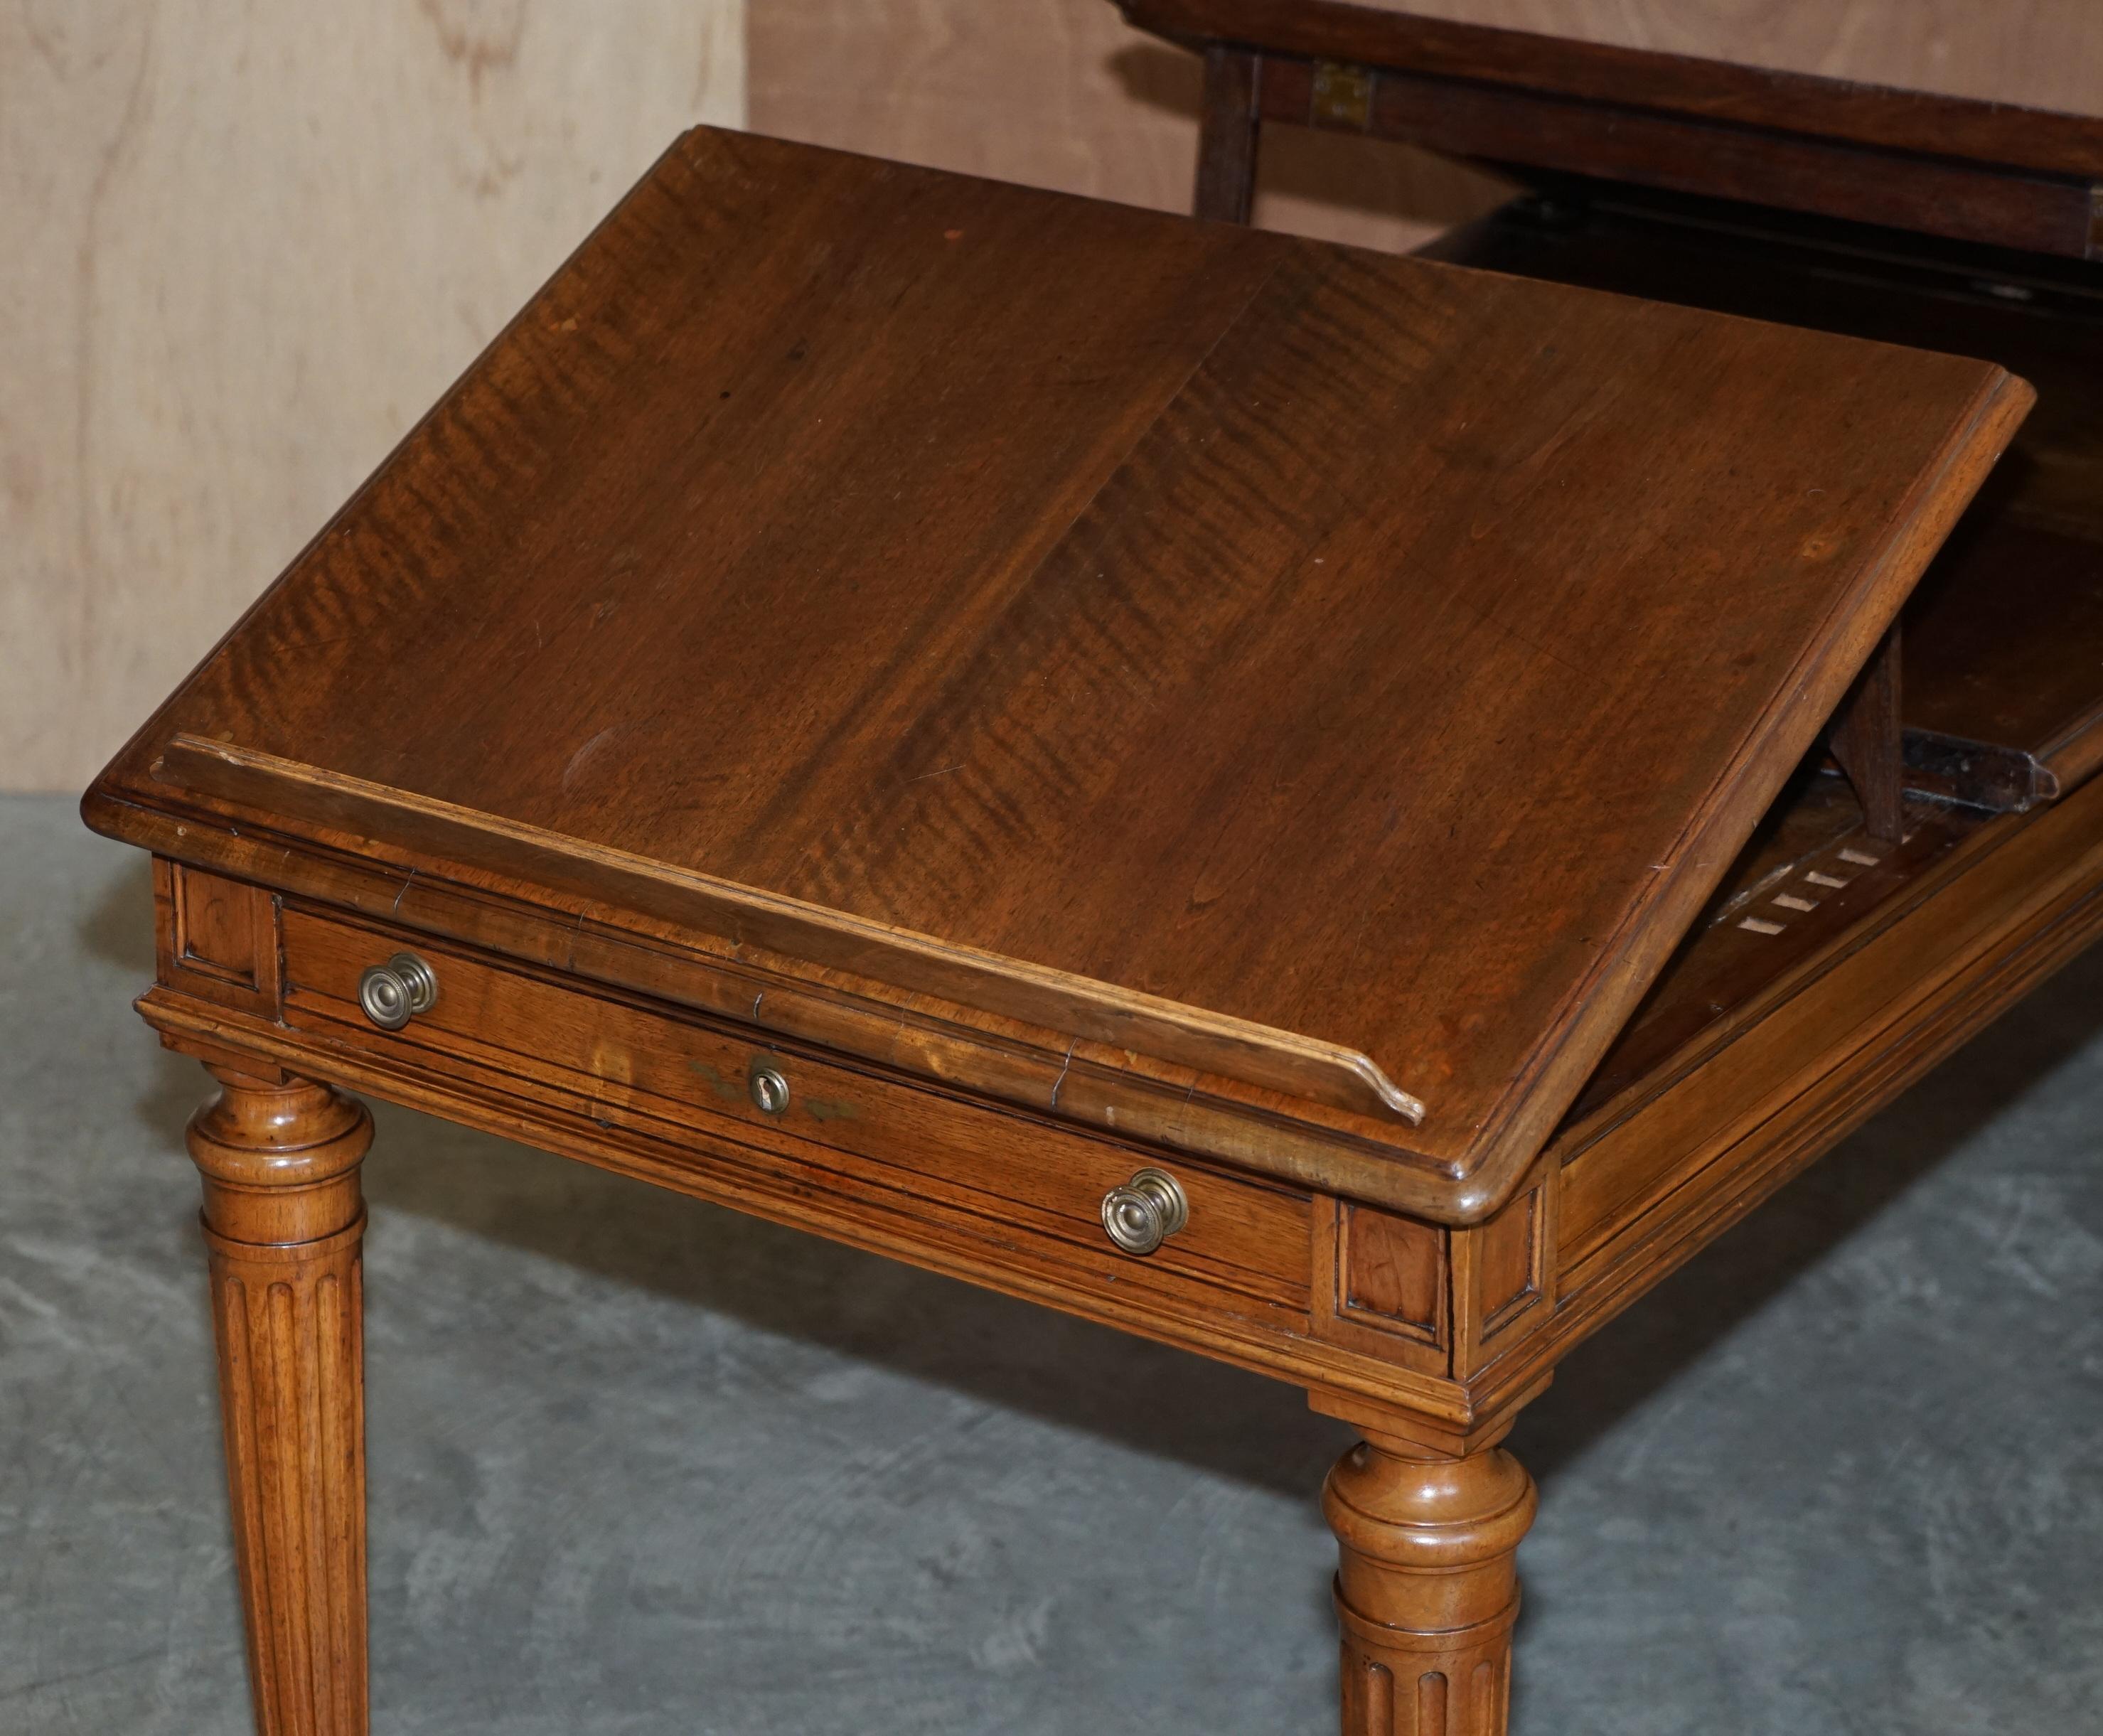 Rare Antique circa 1860 Library Writing Table Desk with Twin Writing Slopes For Sale 13